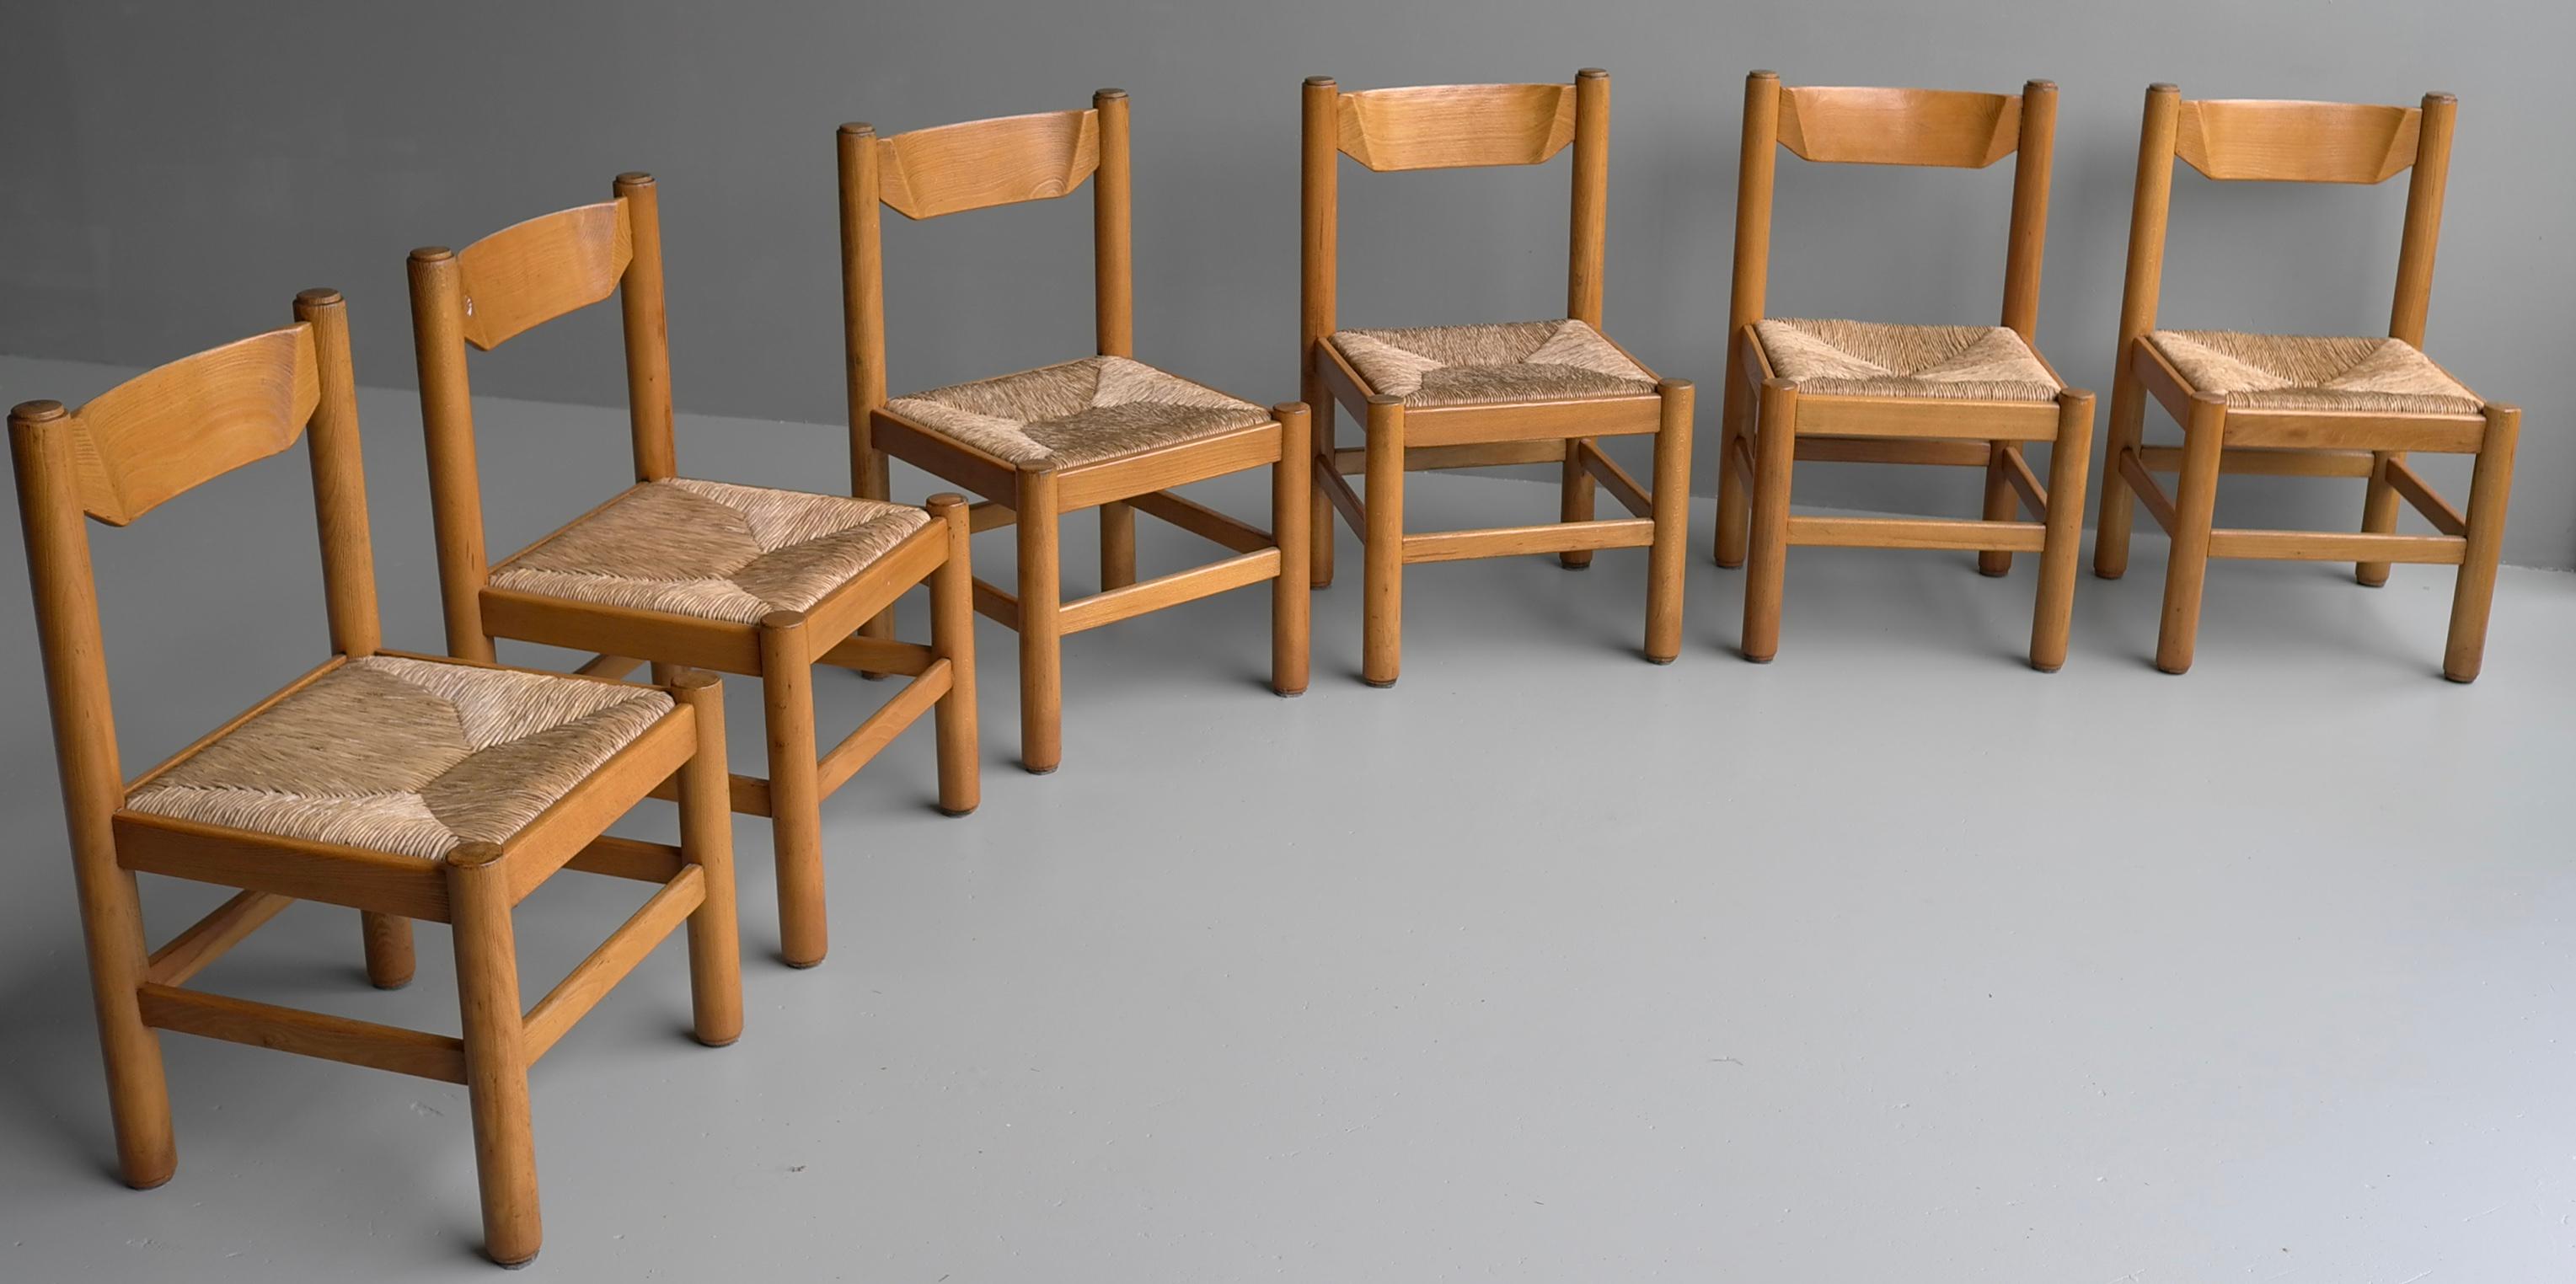 Set of eight wooden dining chairs in style of Charlotte Perriand, France, 1960
Solid heavy wooden chairs with cane or rush seats. The pictures shown only six chairs but we have 2 more. The listed price is for 8 pieces. We also have an identical set